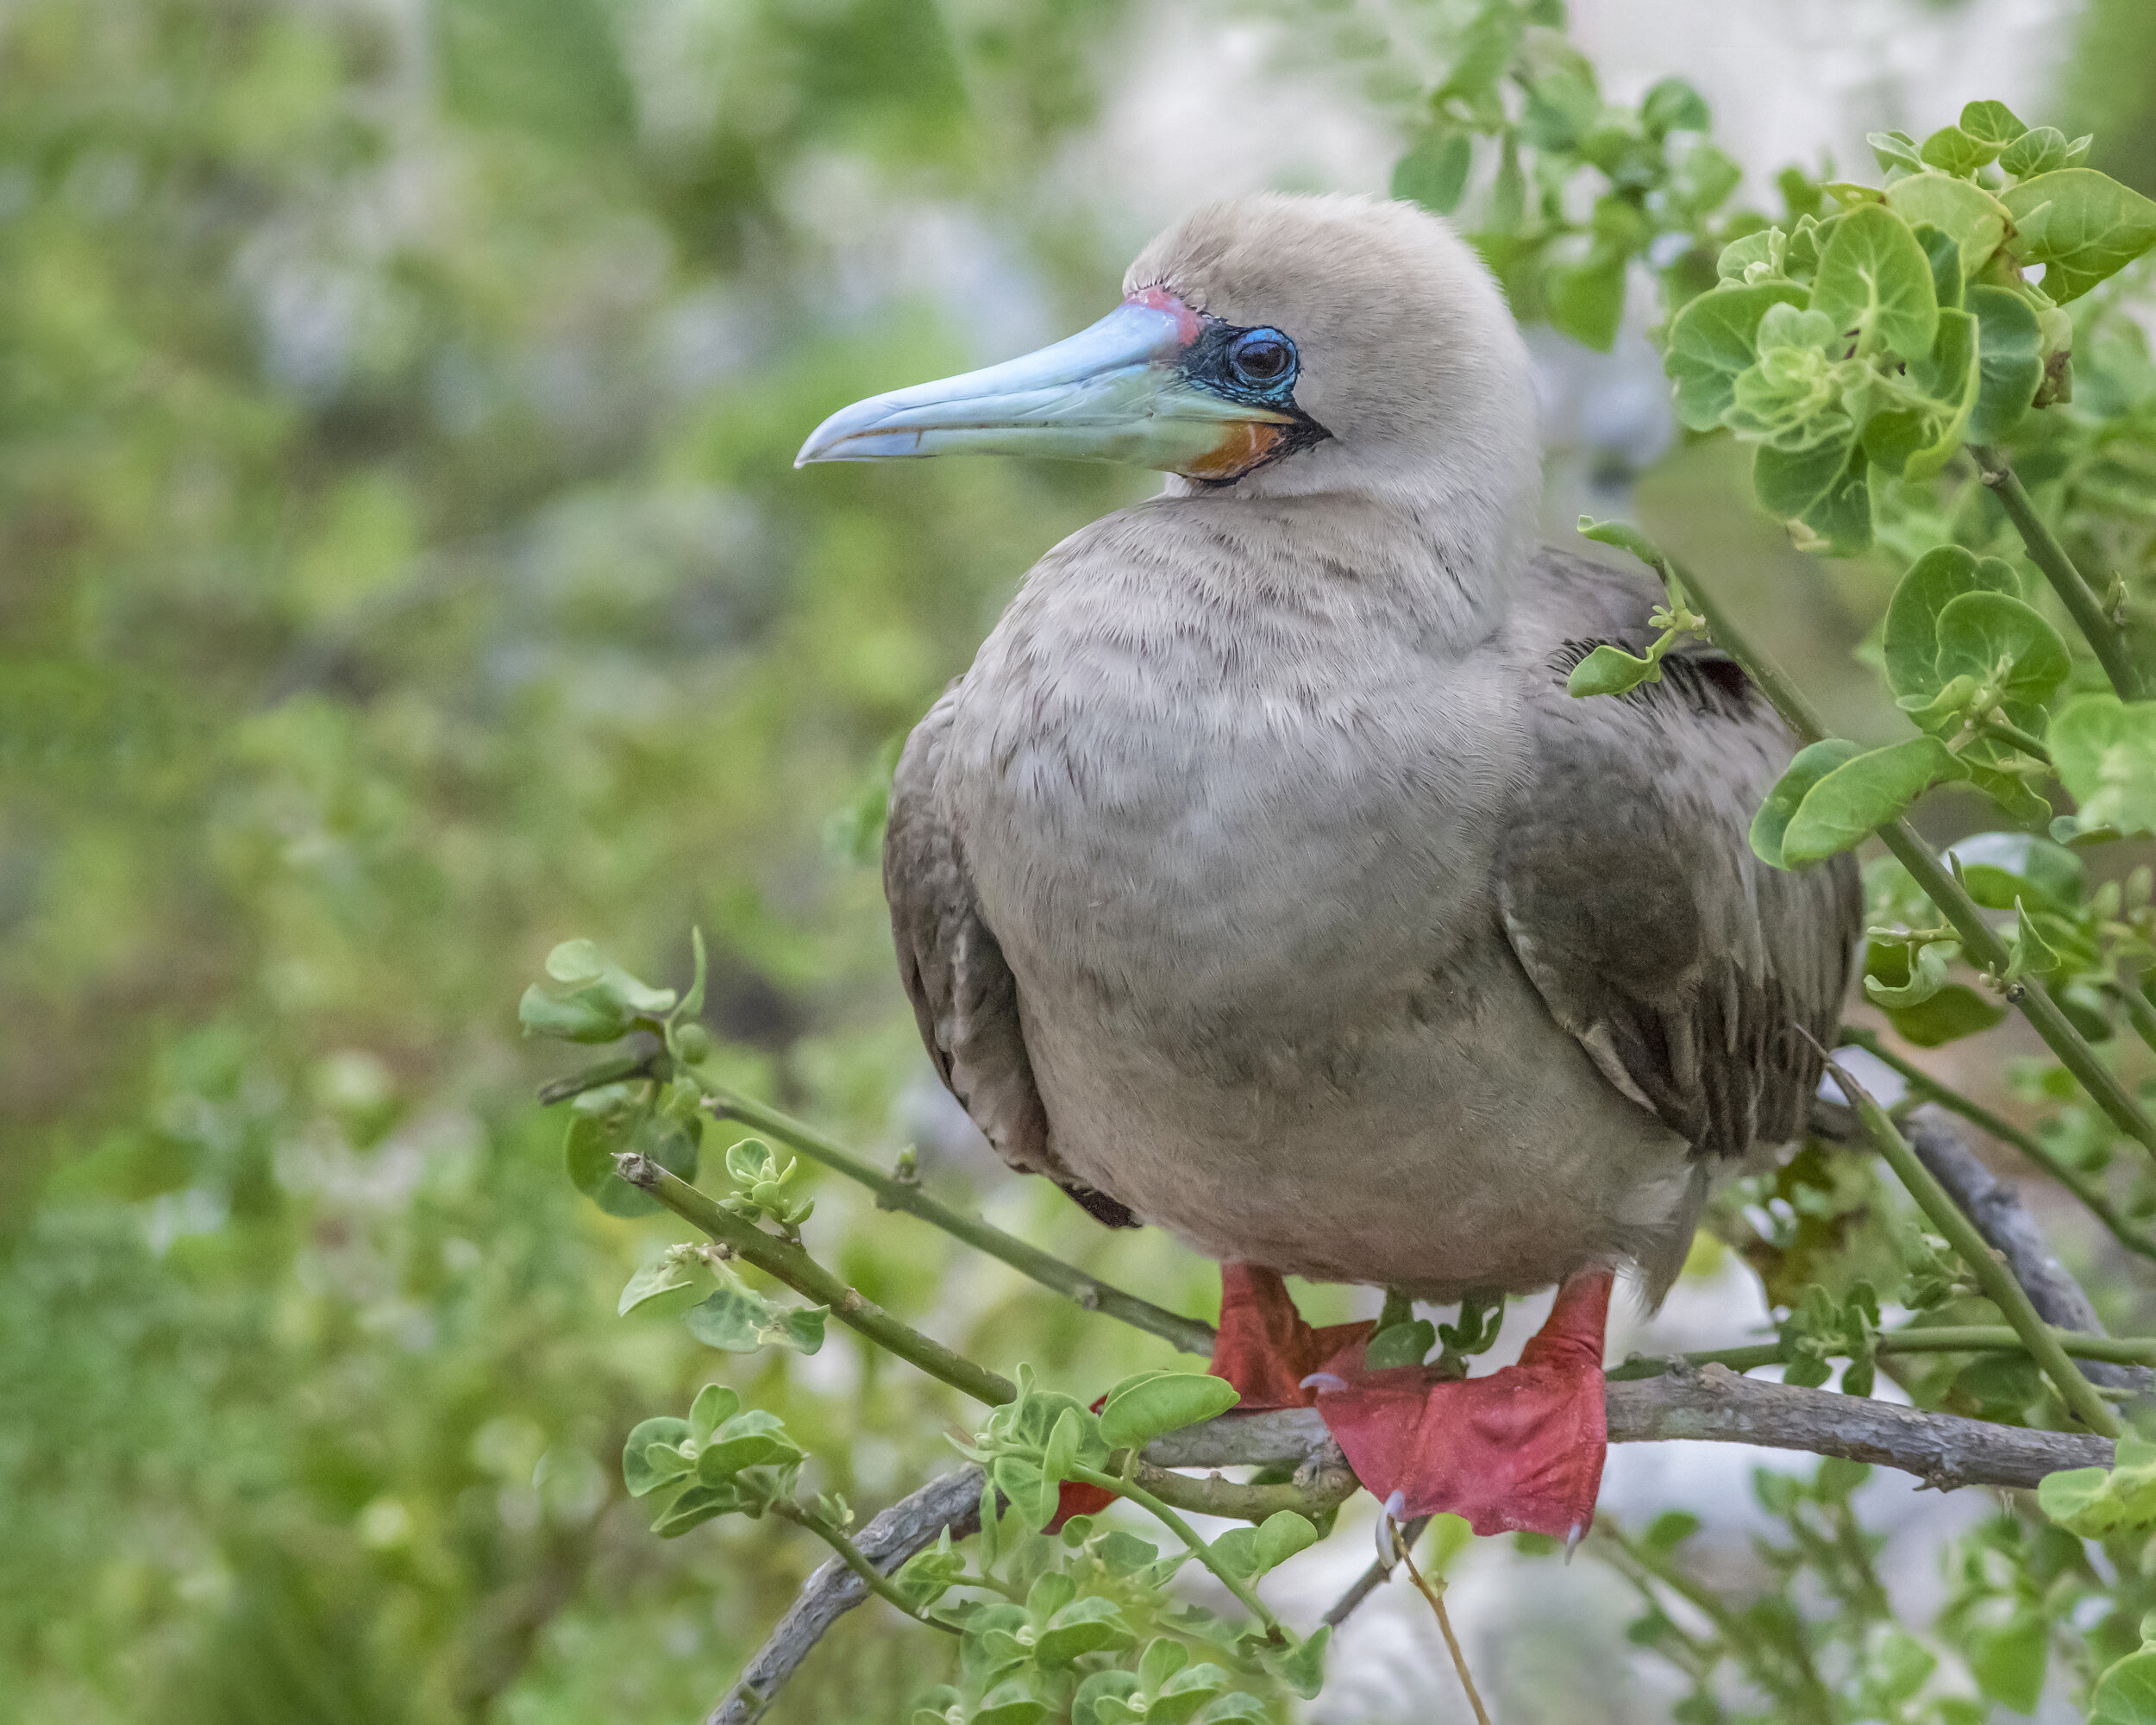 Red Footed Booby (Galapagos Islands)